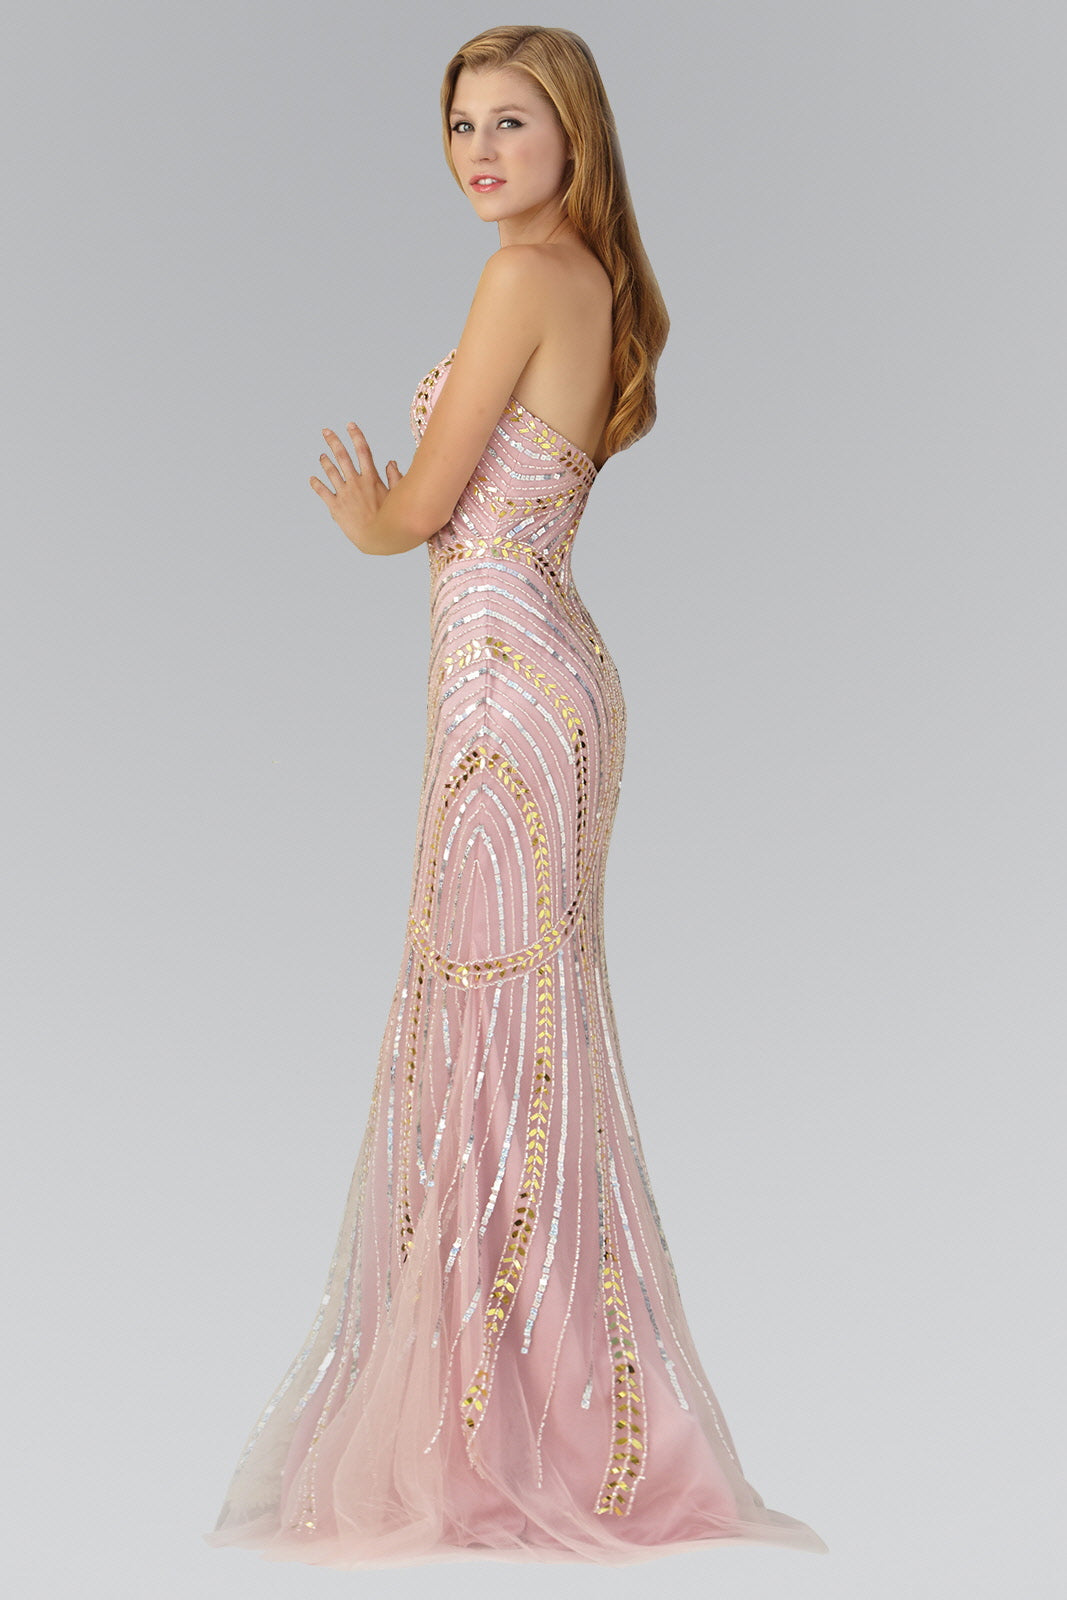 Strapless Sweetheart Long Dress with Bead Detailing GLGL2089 Elsy Style PROM